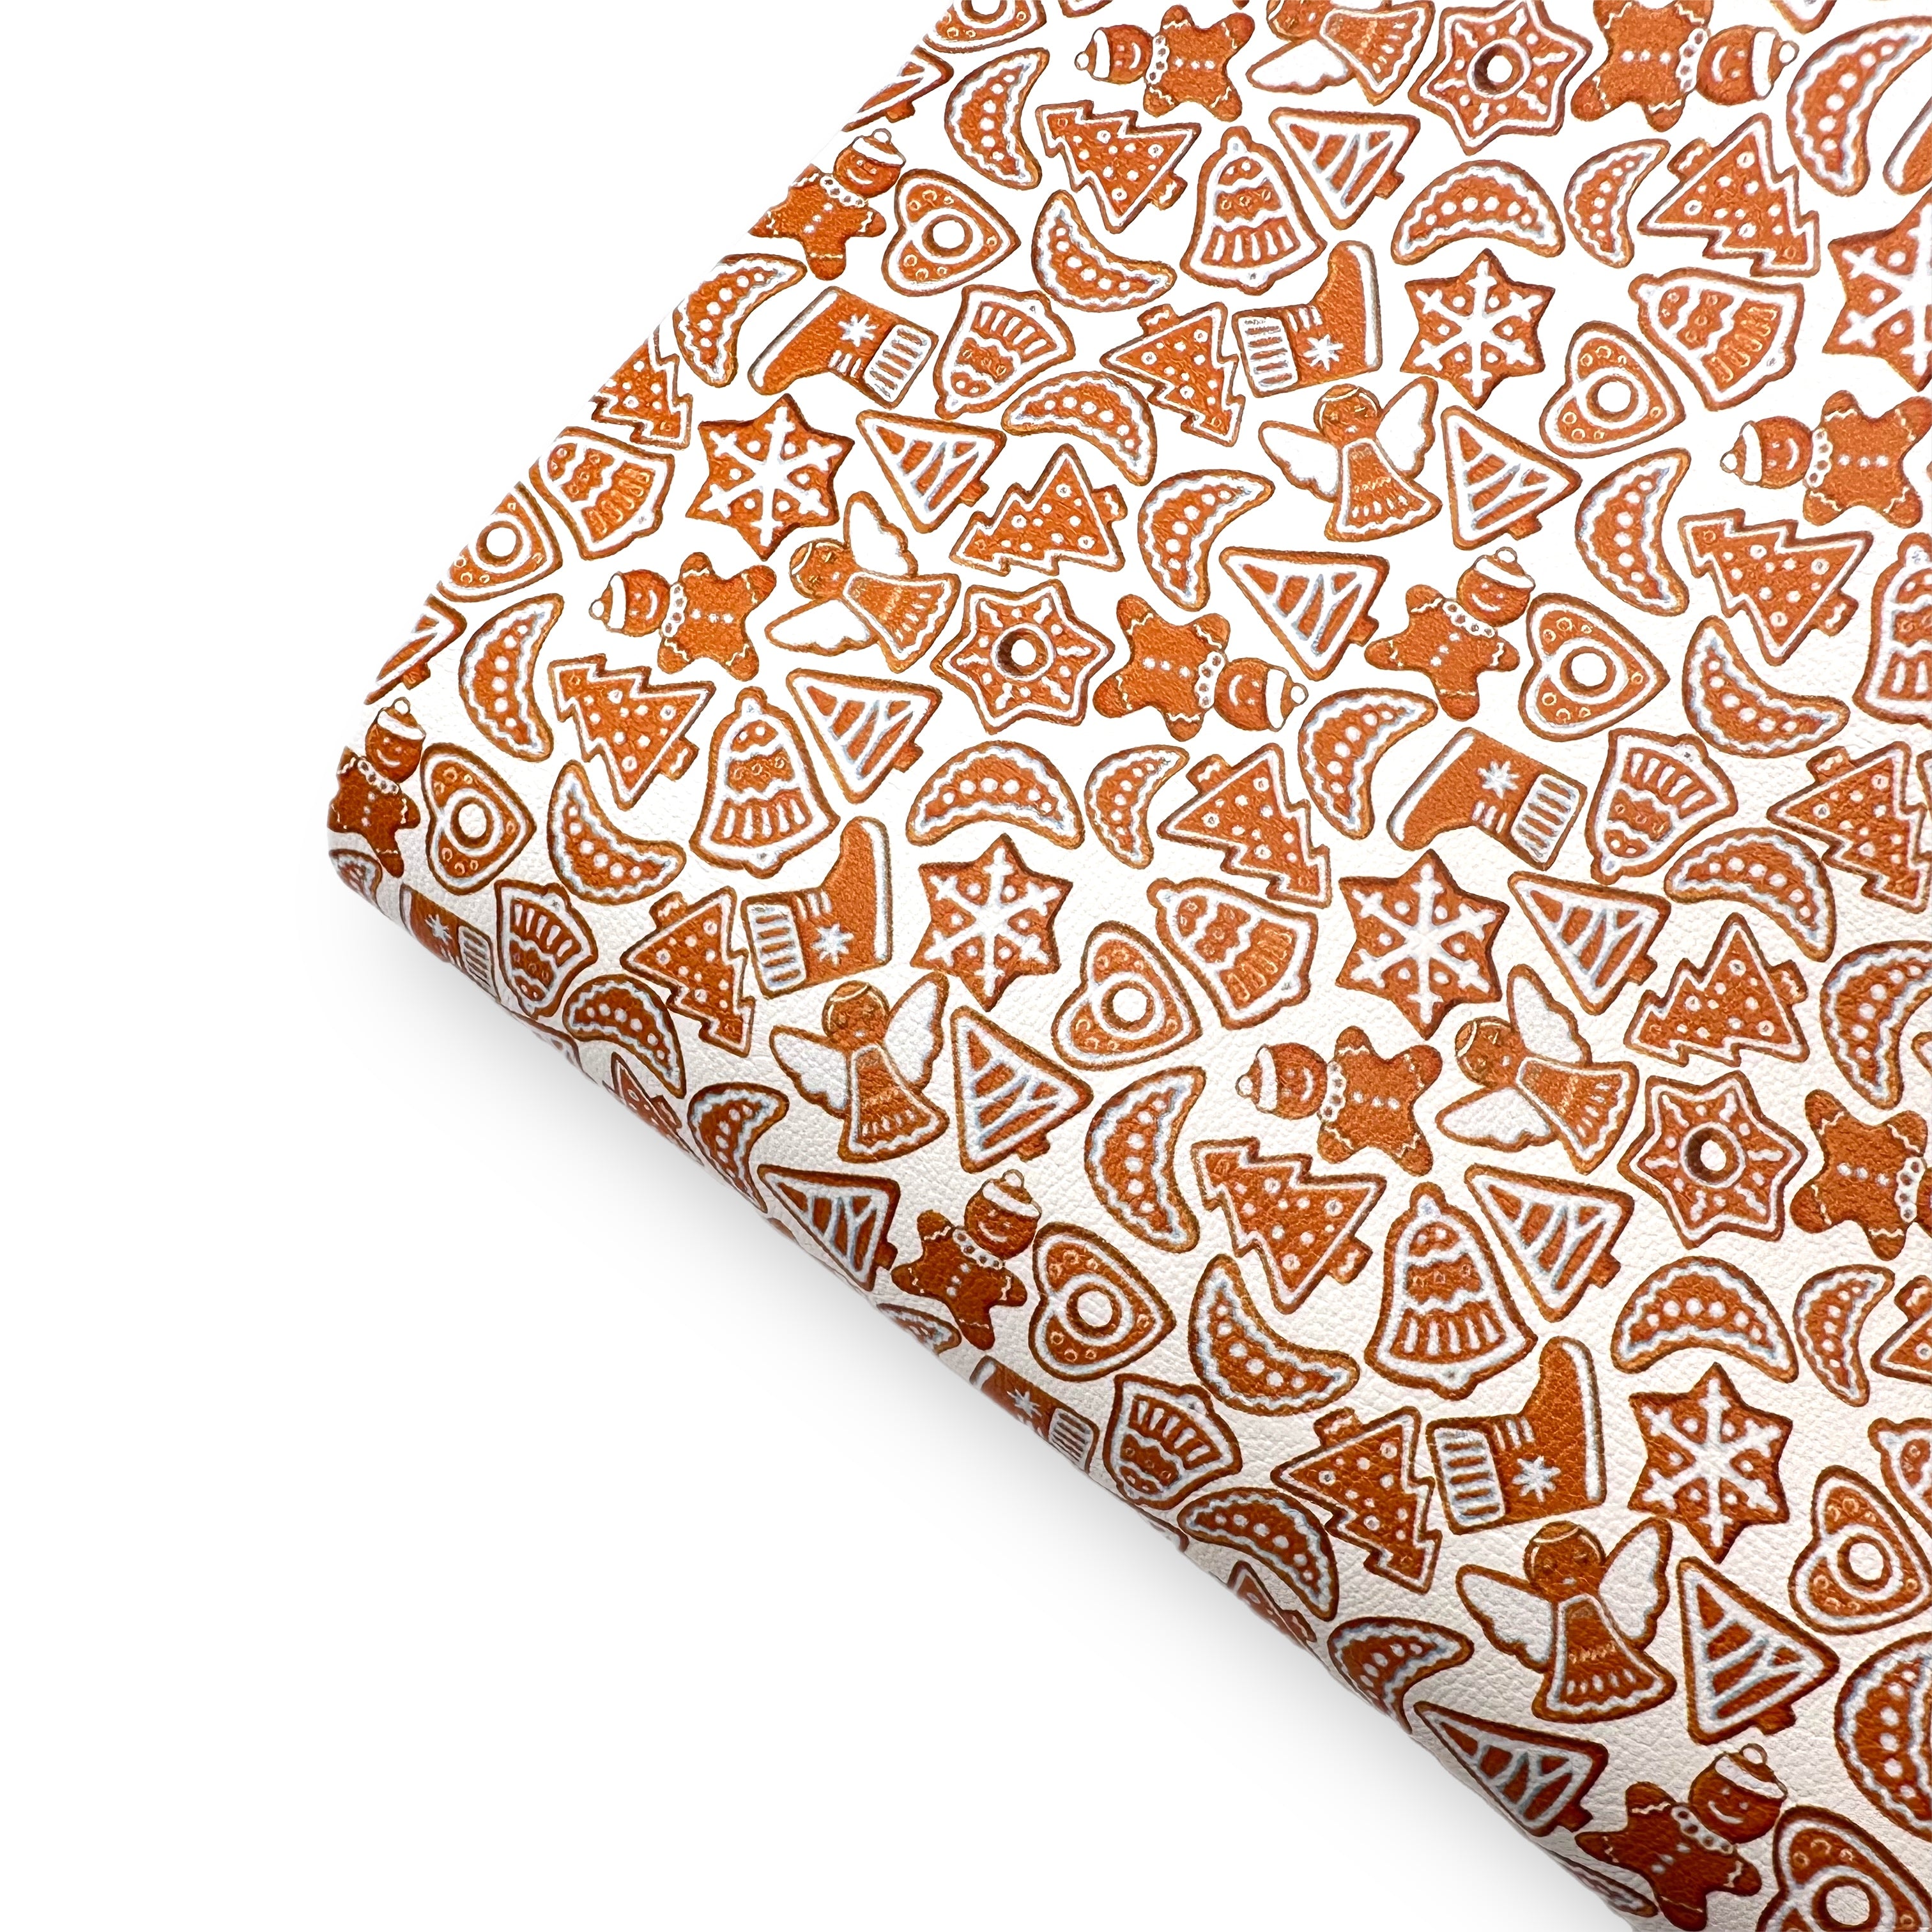 Gingerbread Cookie Shapes Premium Faux Leather Fabric Sheets